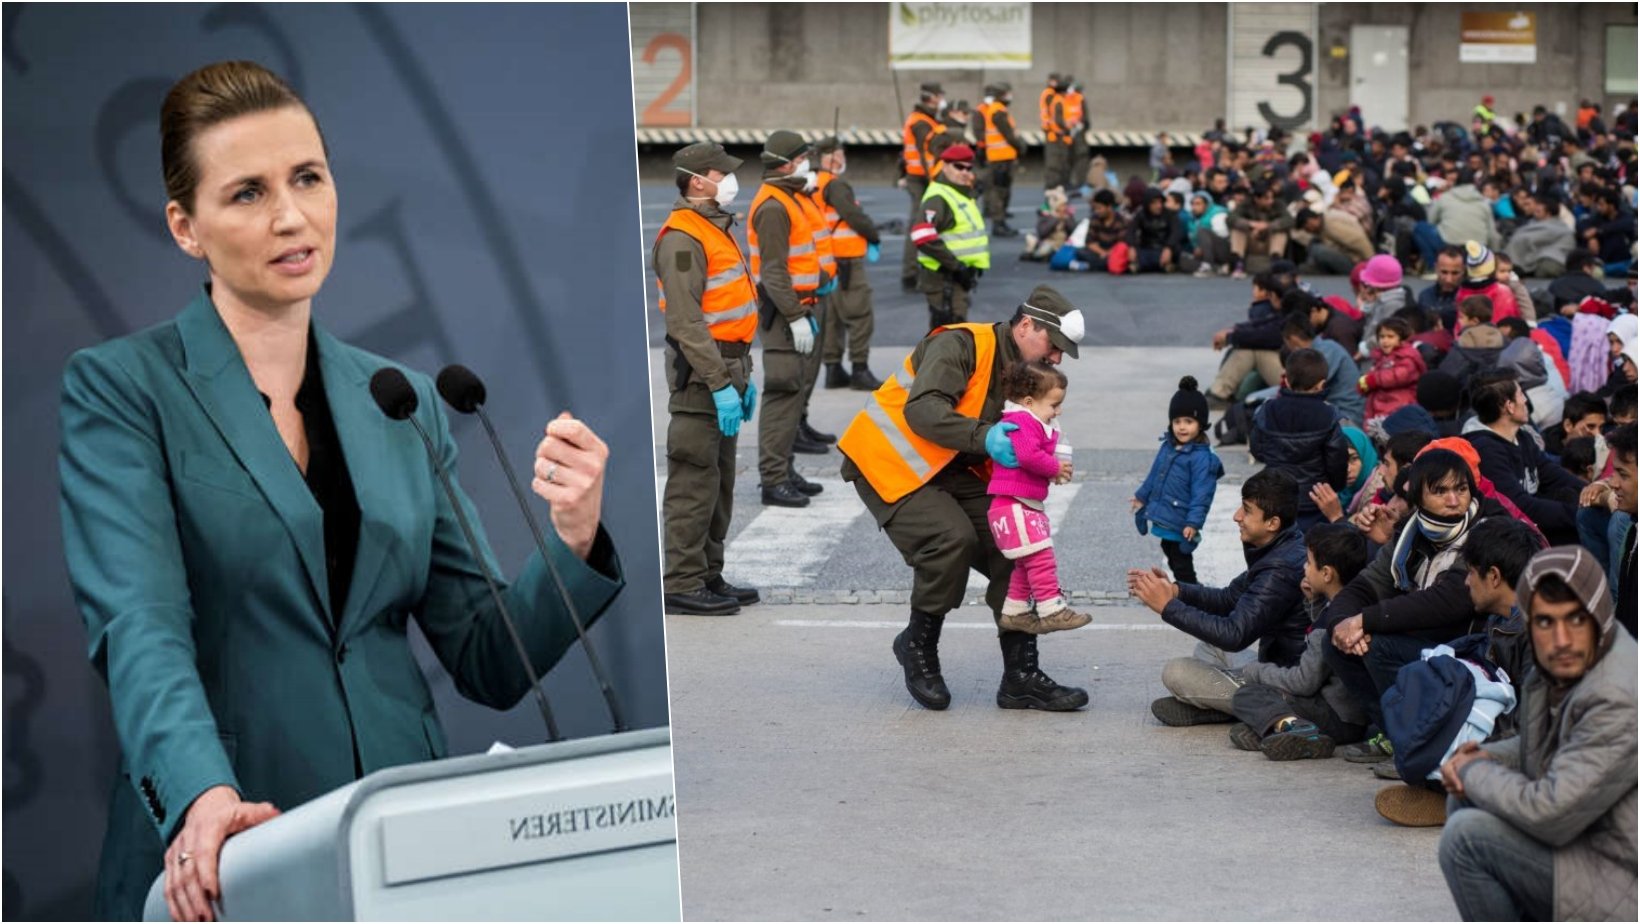 6 facebook cover 11.jpg?resize=412,232 - Denmark Plans To Make Migrants Work To Earn Welfare Benefits Because 'There Are Too Many Who Do Not Have A Job'